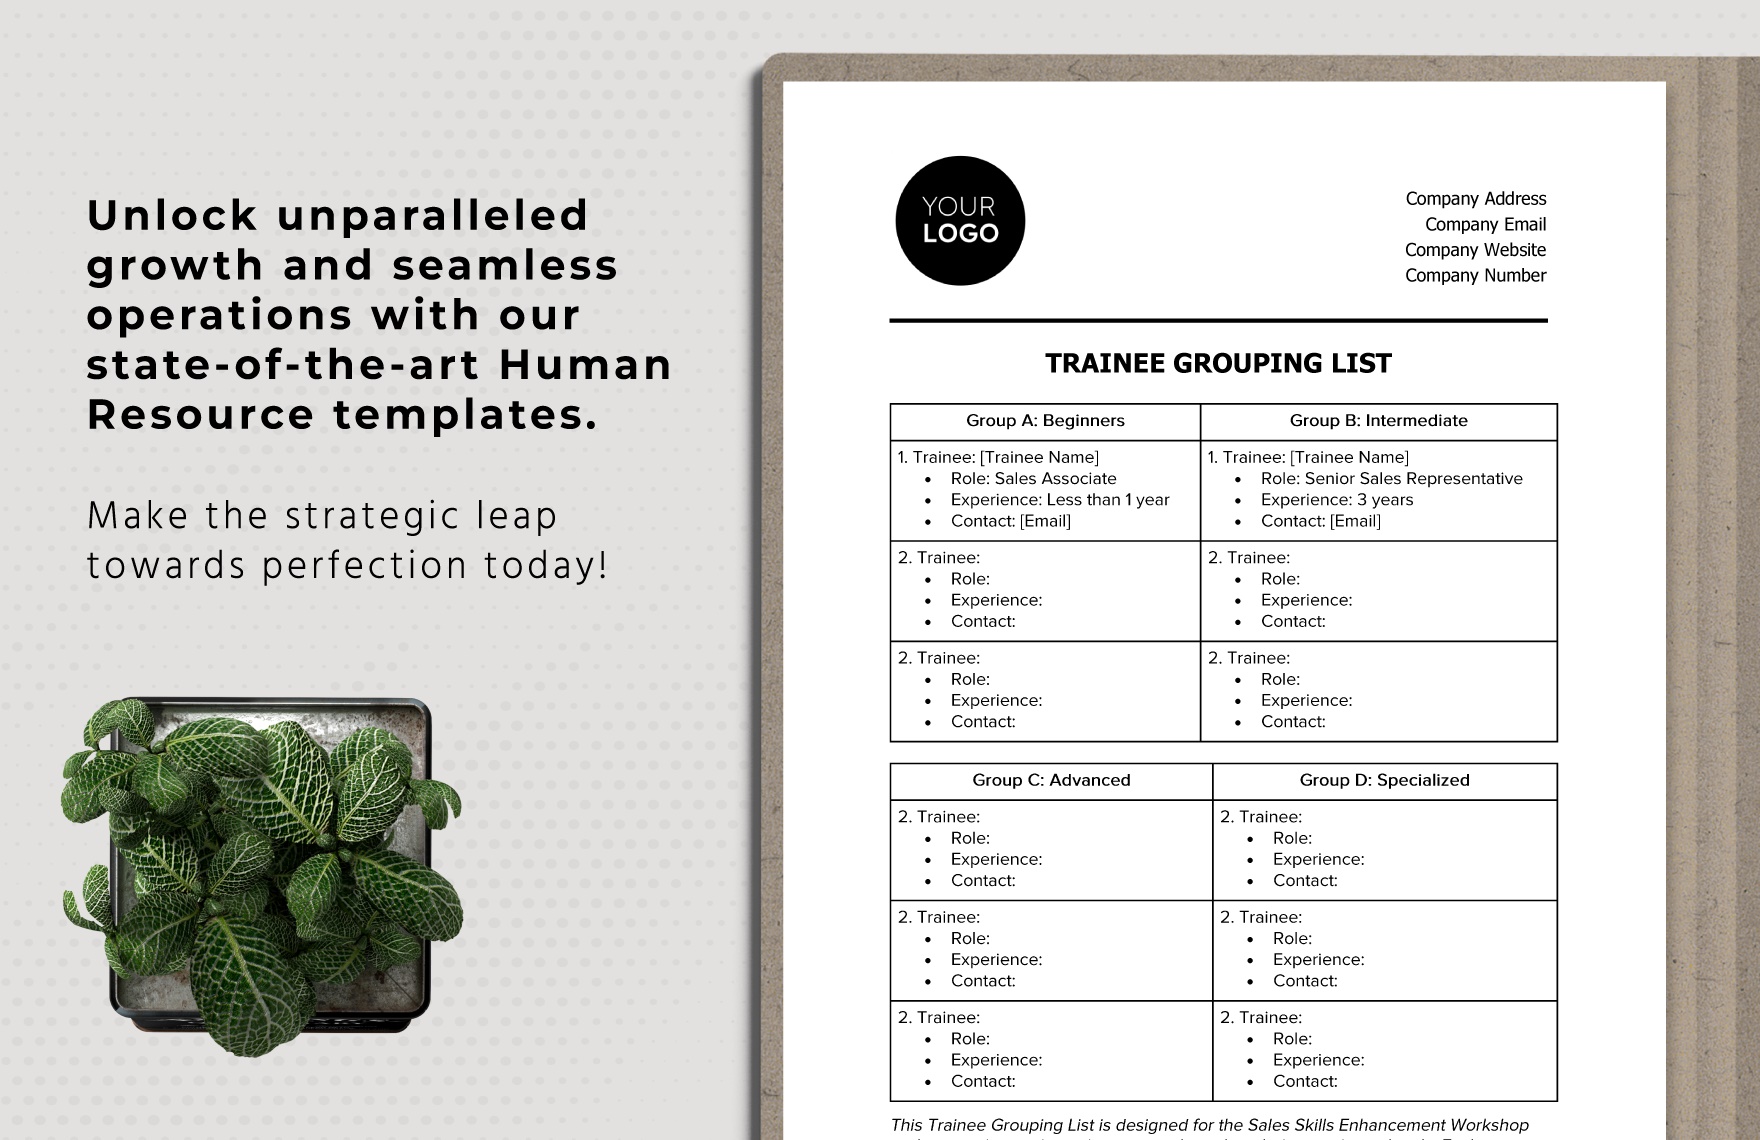 Trainee Grouping List HR Template